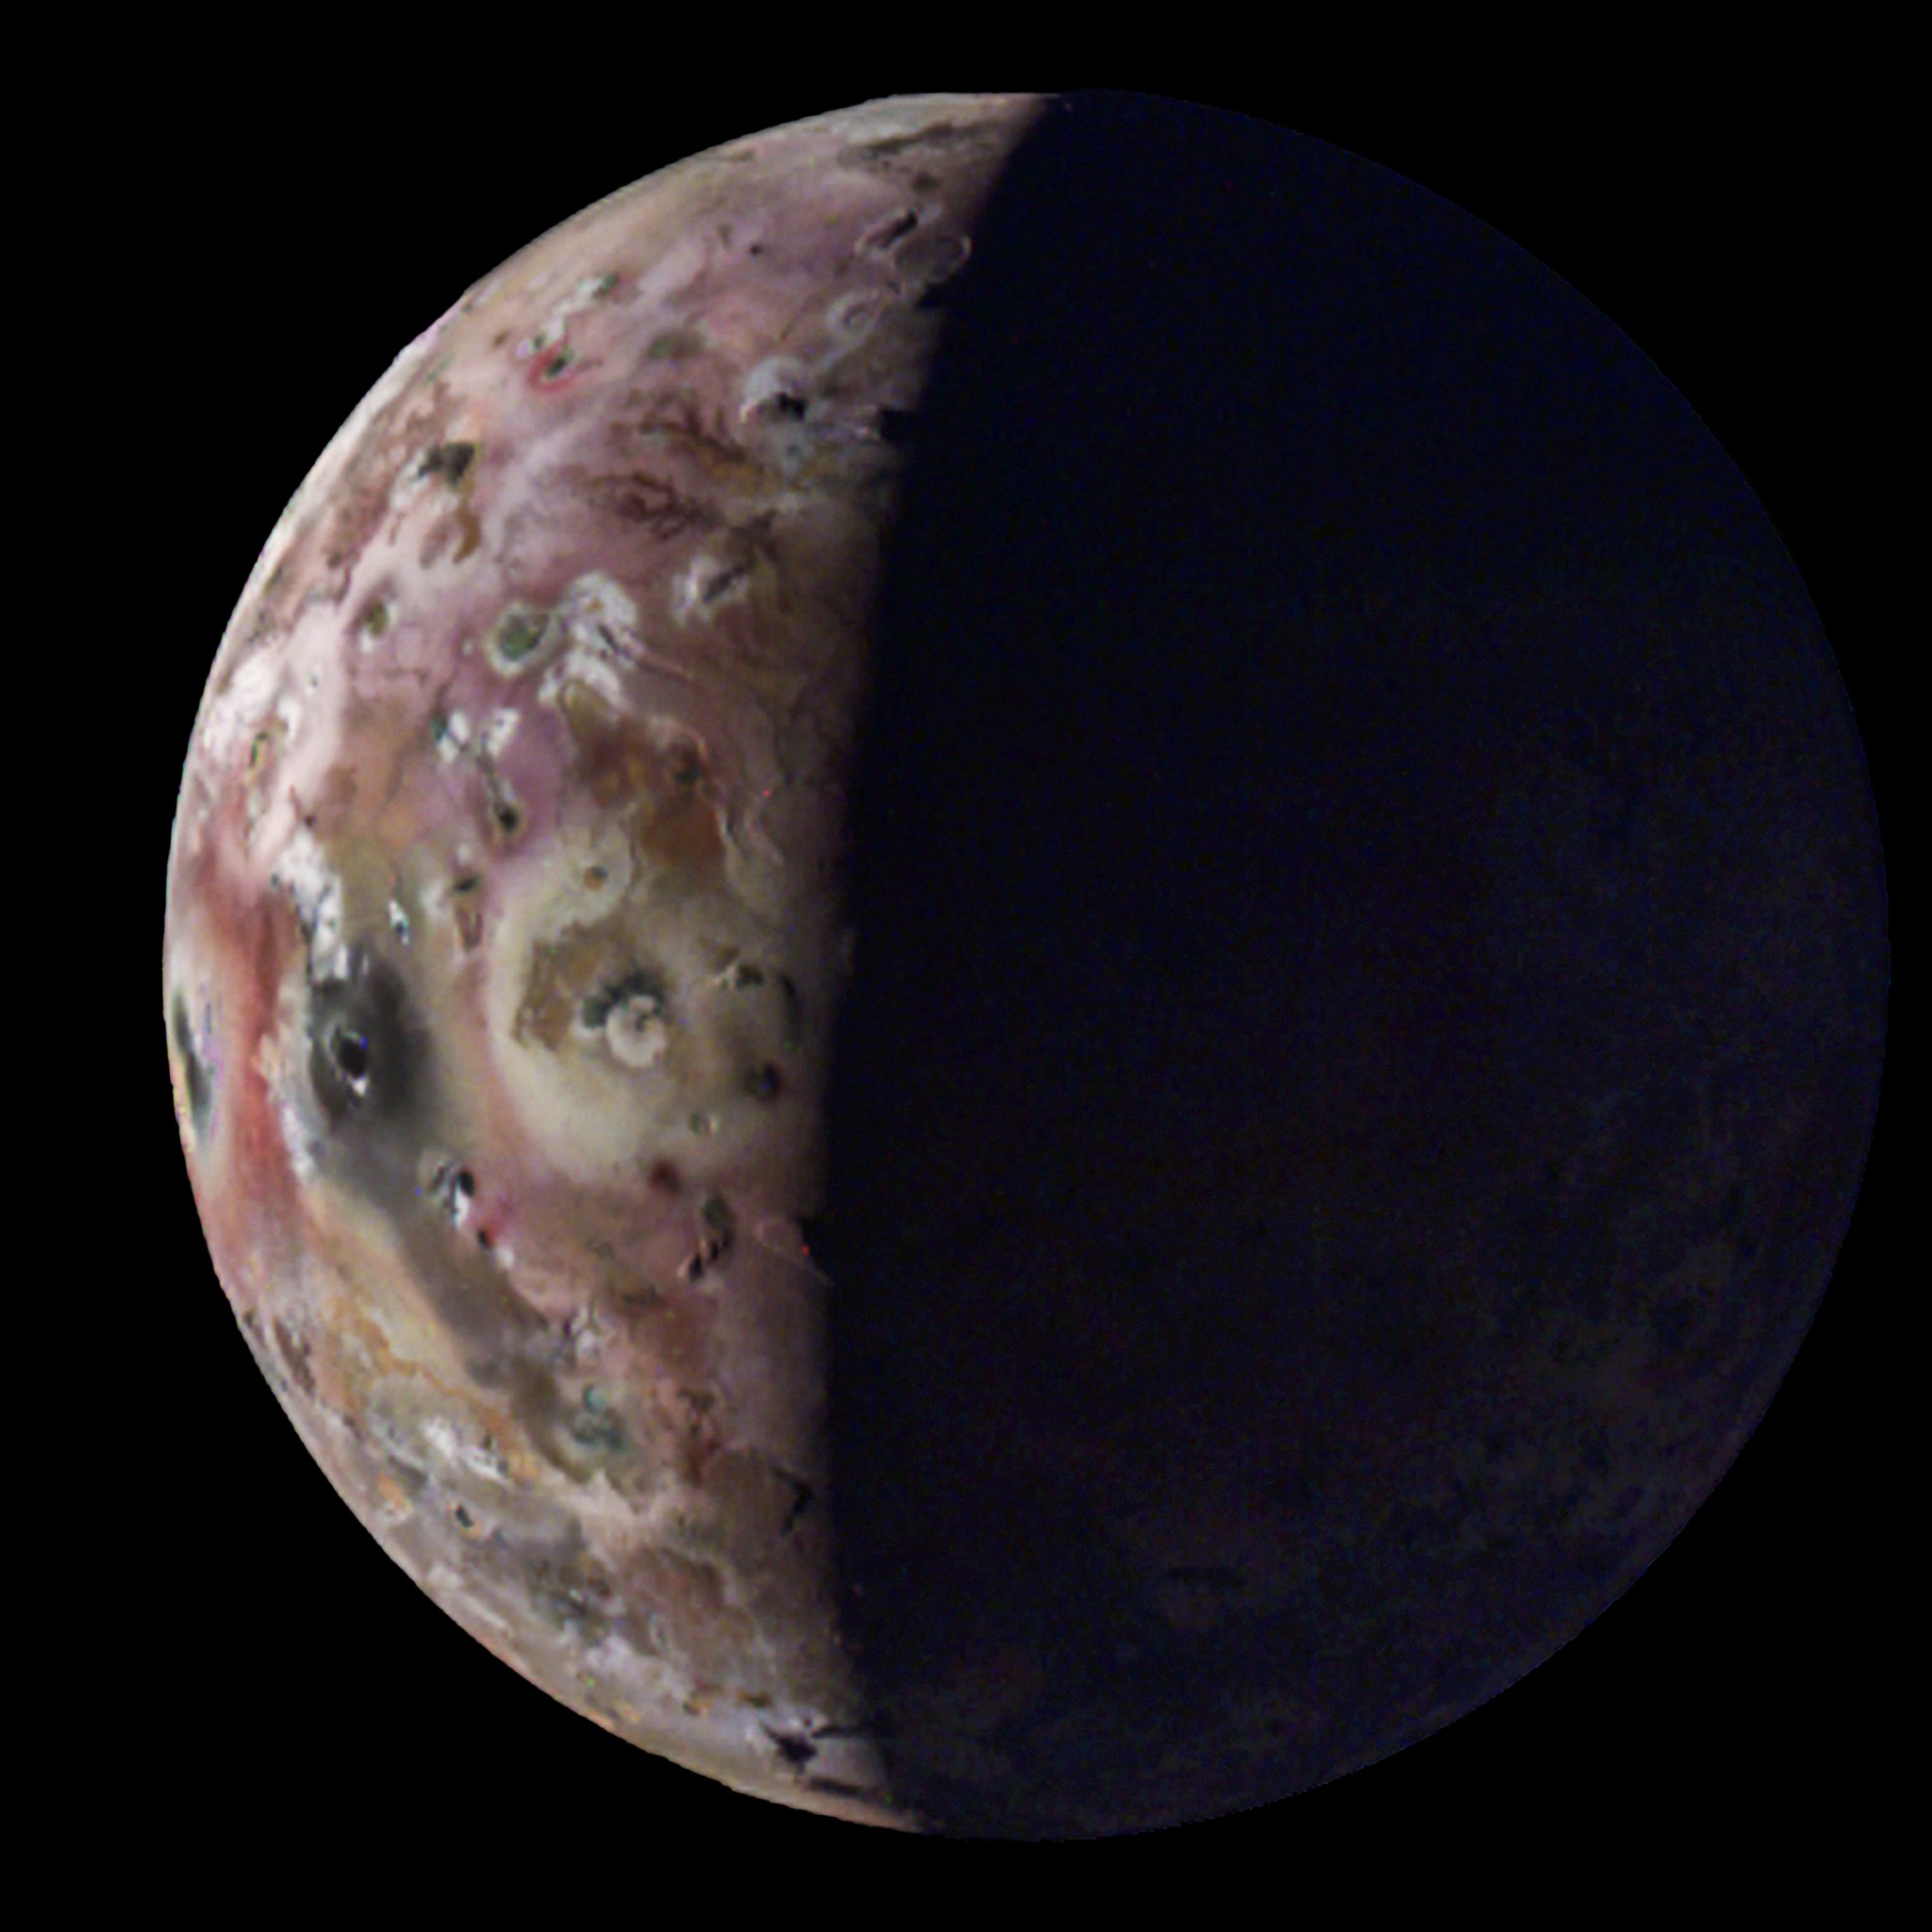 The JunoCam instrument on NASA's Juno captured this view of Jupiter's moon Io - with the first-ever image of its south polar region - during the spacecraft's 60th flyby of Jupiter on April 9.